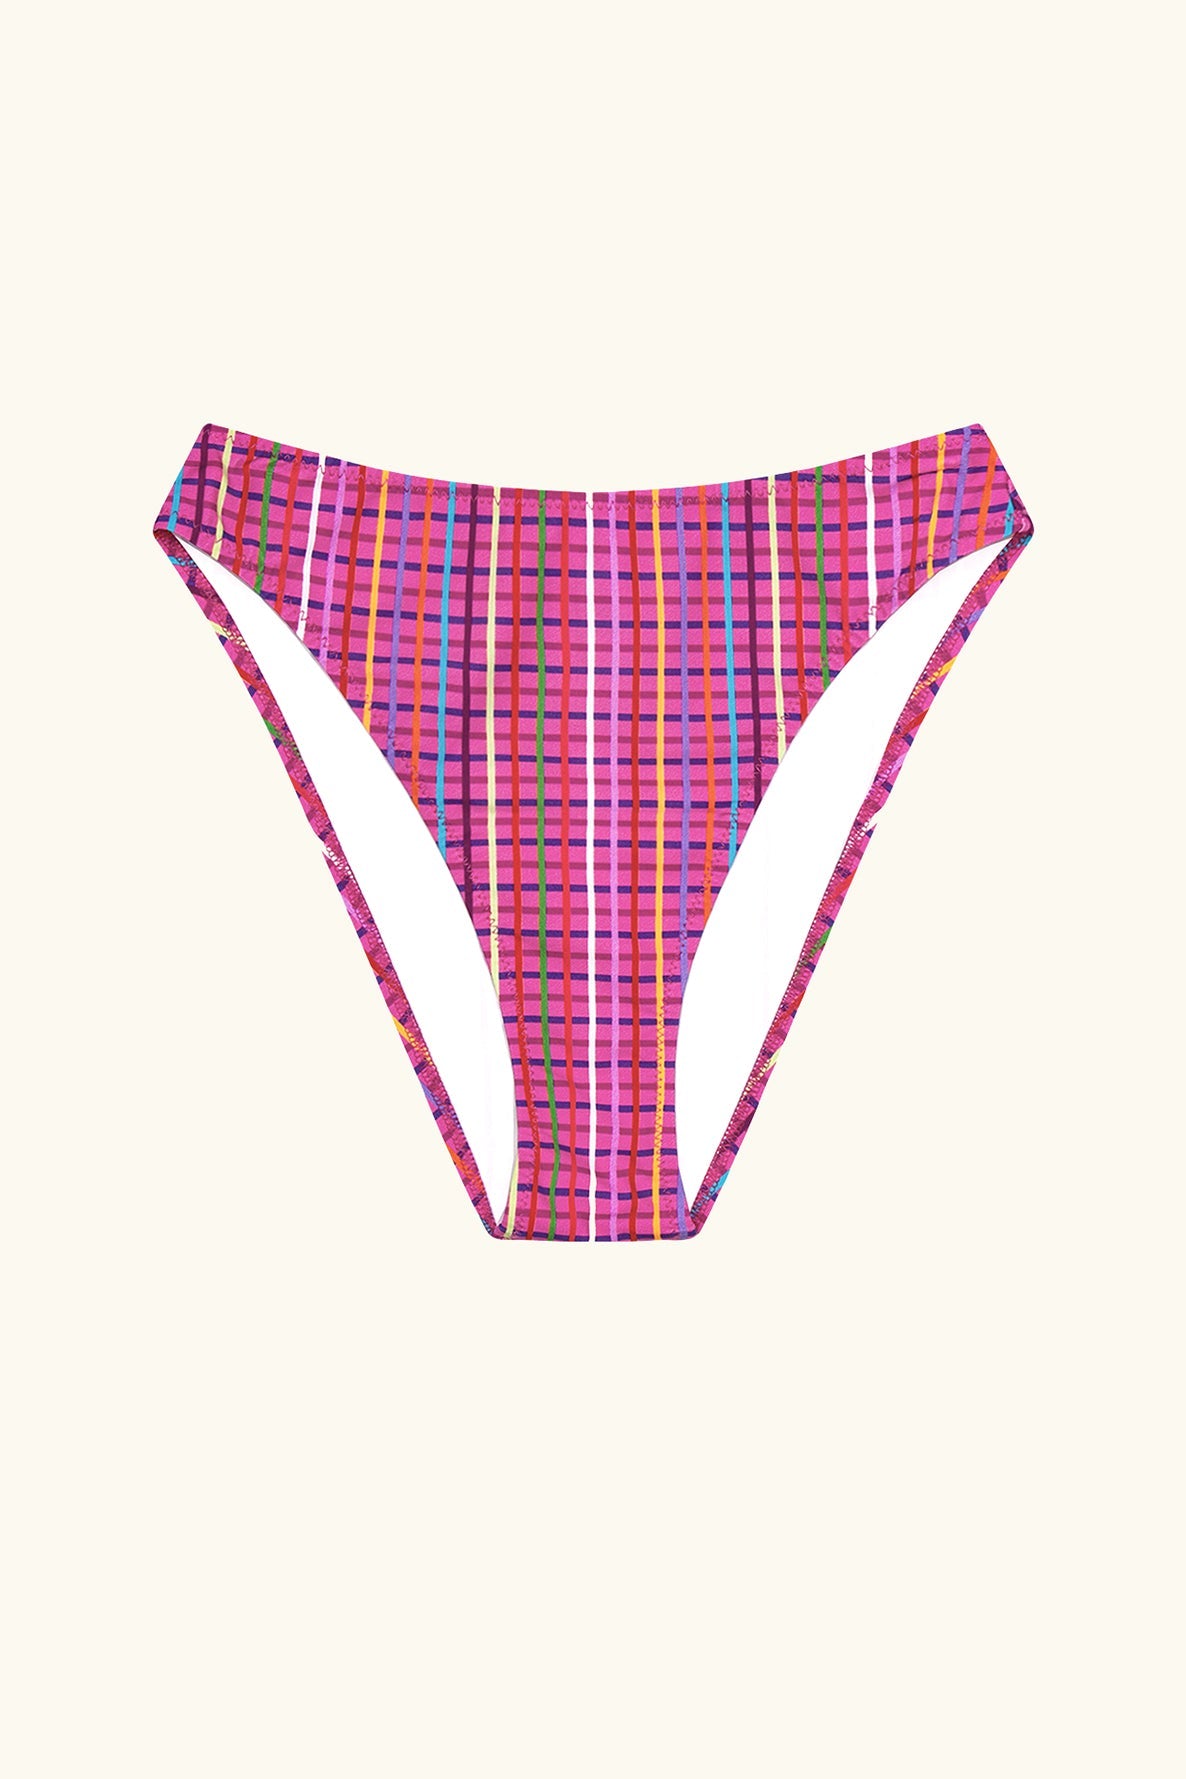 sustainable swimwear high rise french cut bikini bottom in pink with colored stripes